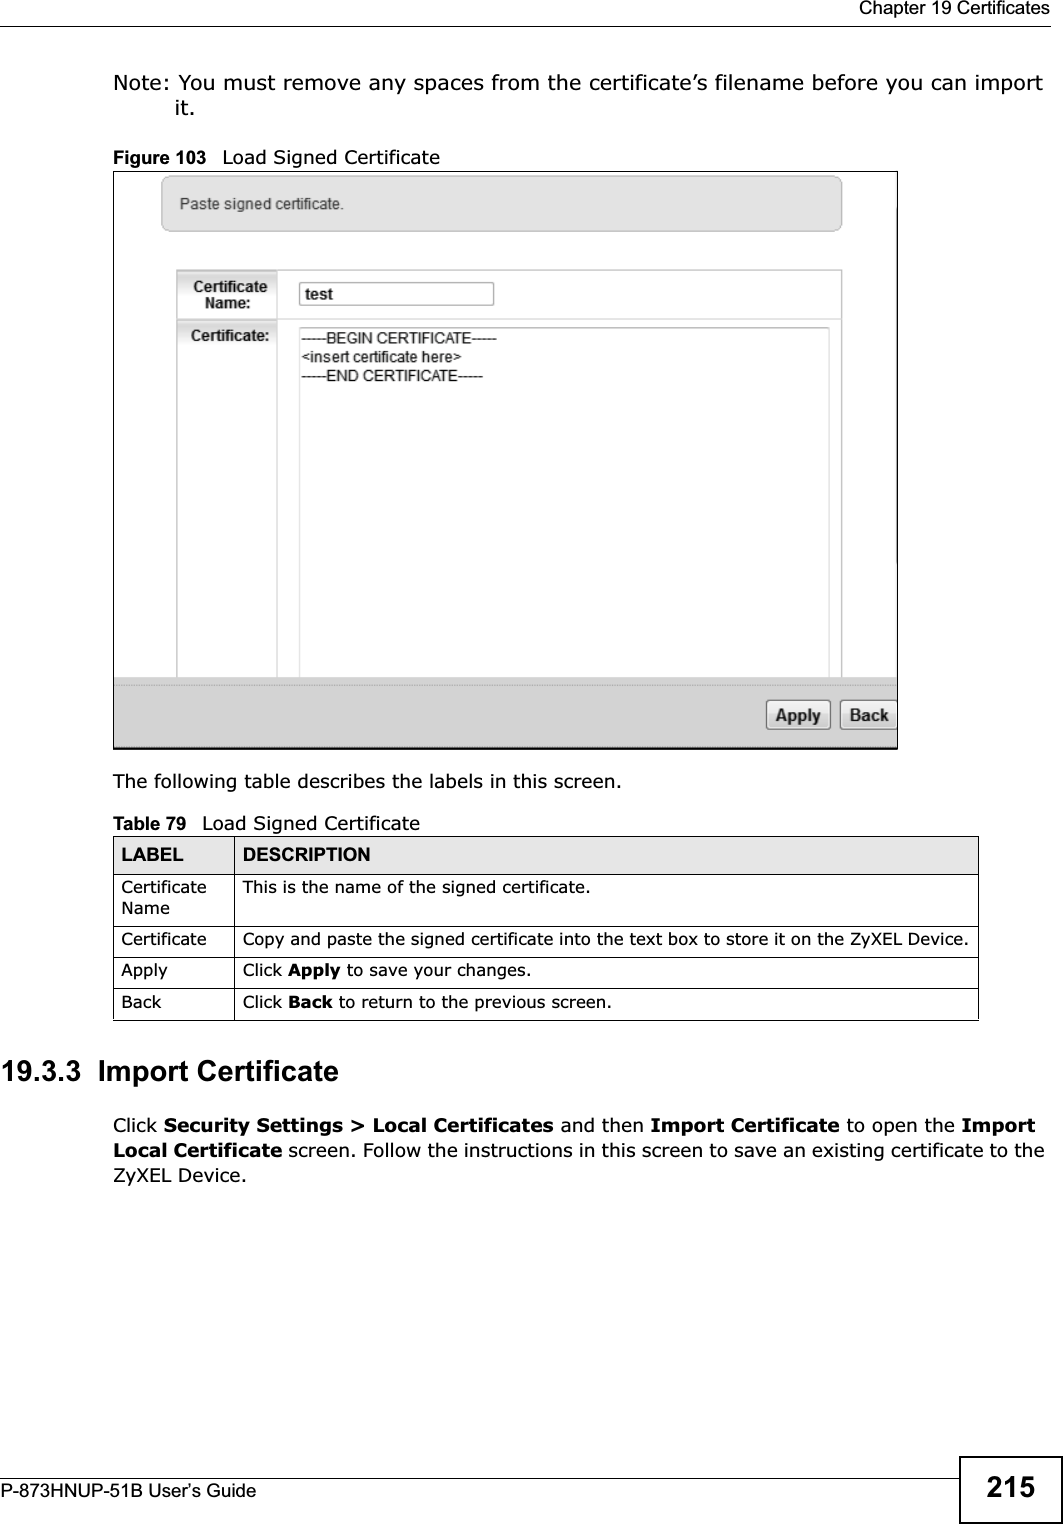  Chapter 19 CertificatesP-873HNUP-51B User’s Guide 215Note: You must remove any spaces from the certificate’s filename before you can import it.Figure 103   Load Signed Certificate The following table describes the labels in this screen. 19.3.3  Import Certificate Click Security Settings &gt; Local Certificates and then Import Certificate to open the Import Local Certificate screen. Follow the instructions in this screen to save an existing certificate to the ZyXEL Device. Table 79   Load Signed CertificateLABEL DESCRIPTIONCertificate NameThis is the name of the signed certificate. Certificate Copy and paste the signed certificate into the text box to store it on the ZyXEL Device.Apply Click Apply to save your changes.Back Click Back to return to the previous screen.